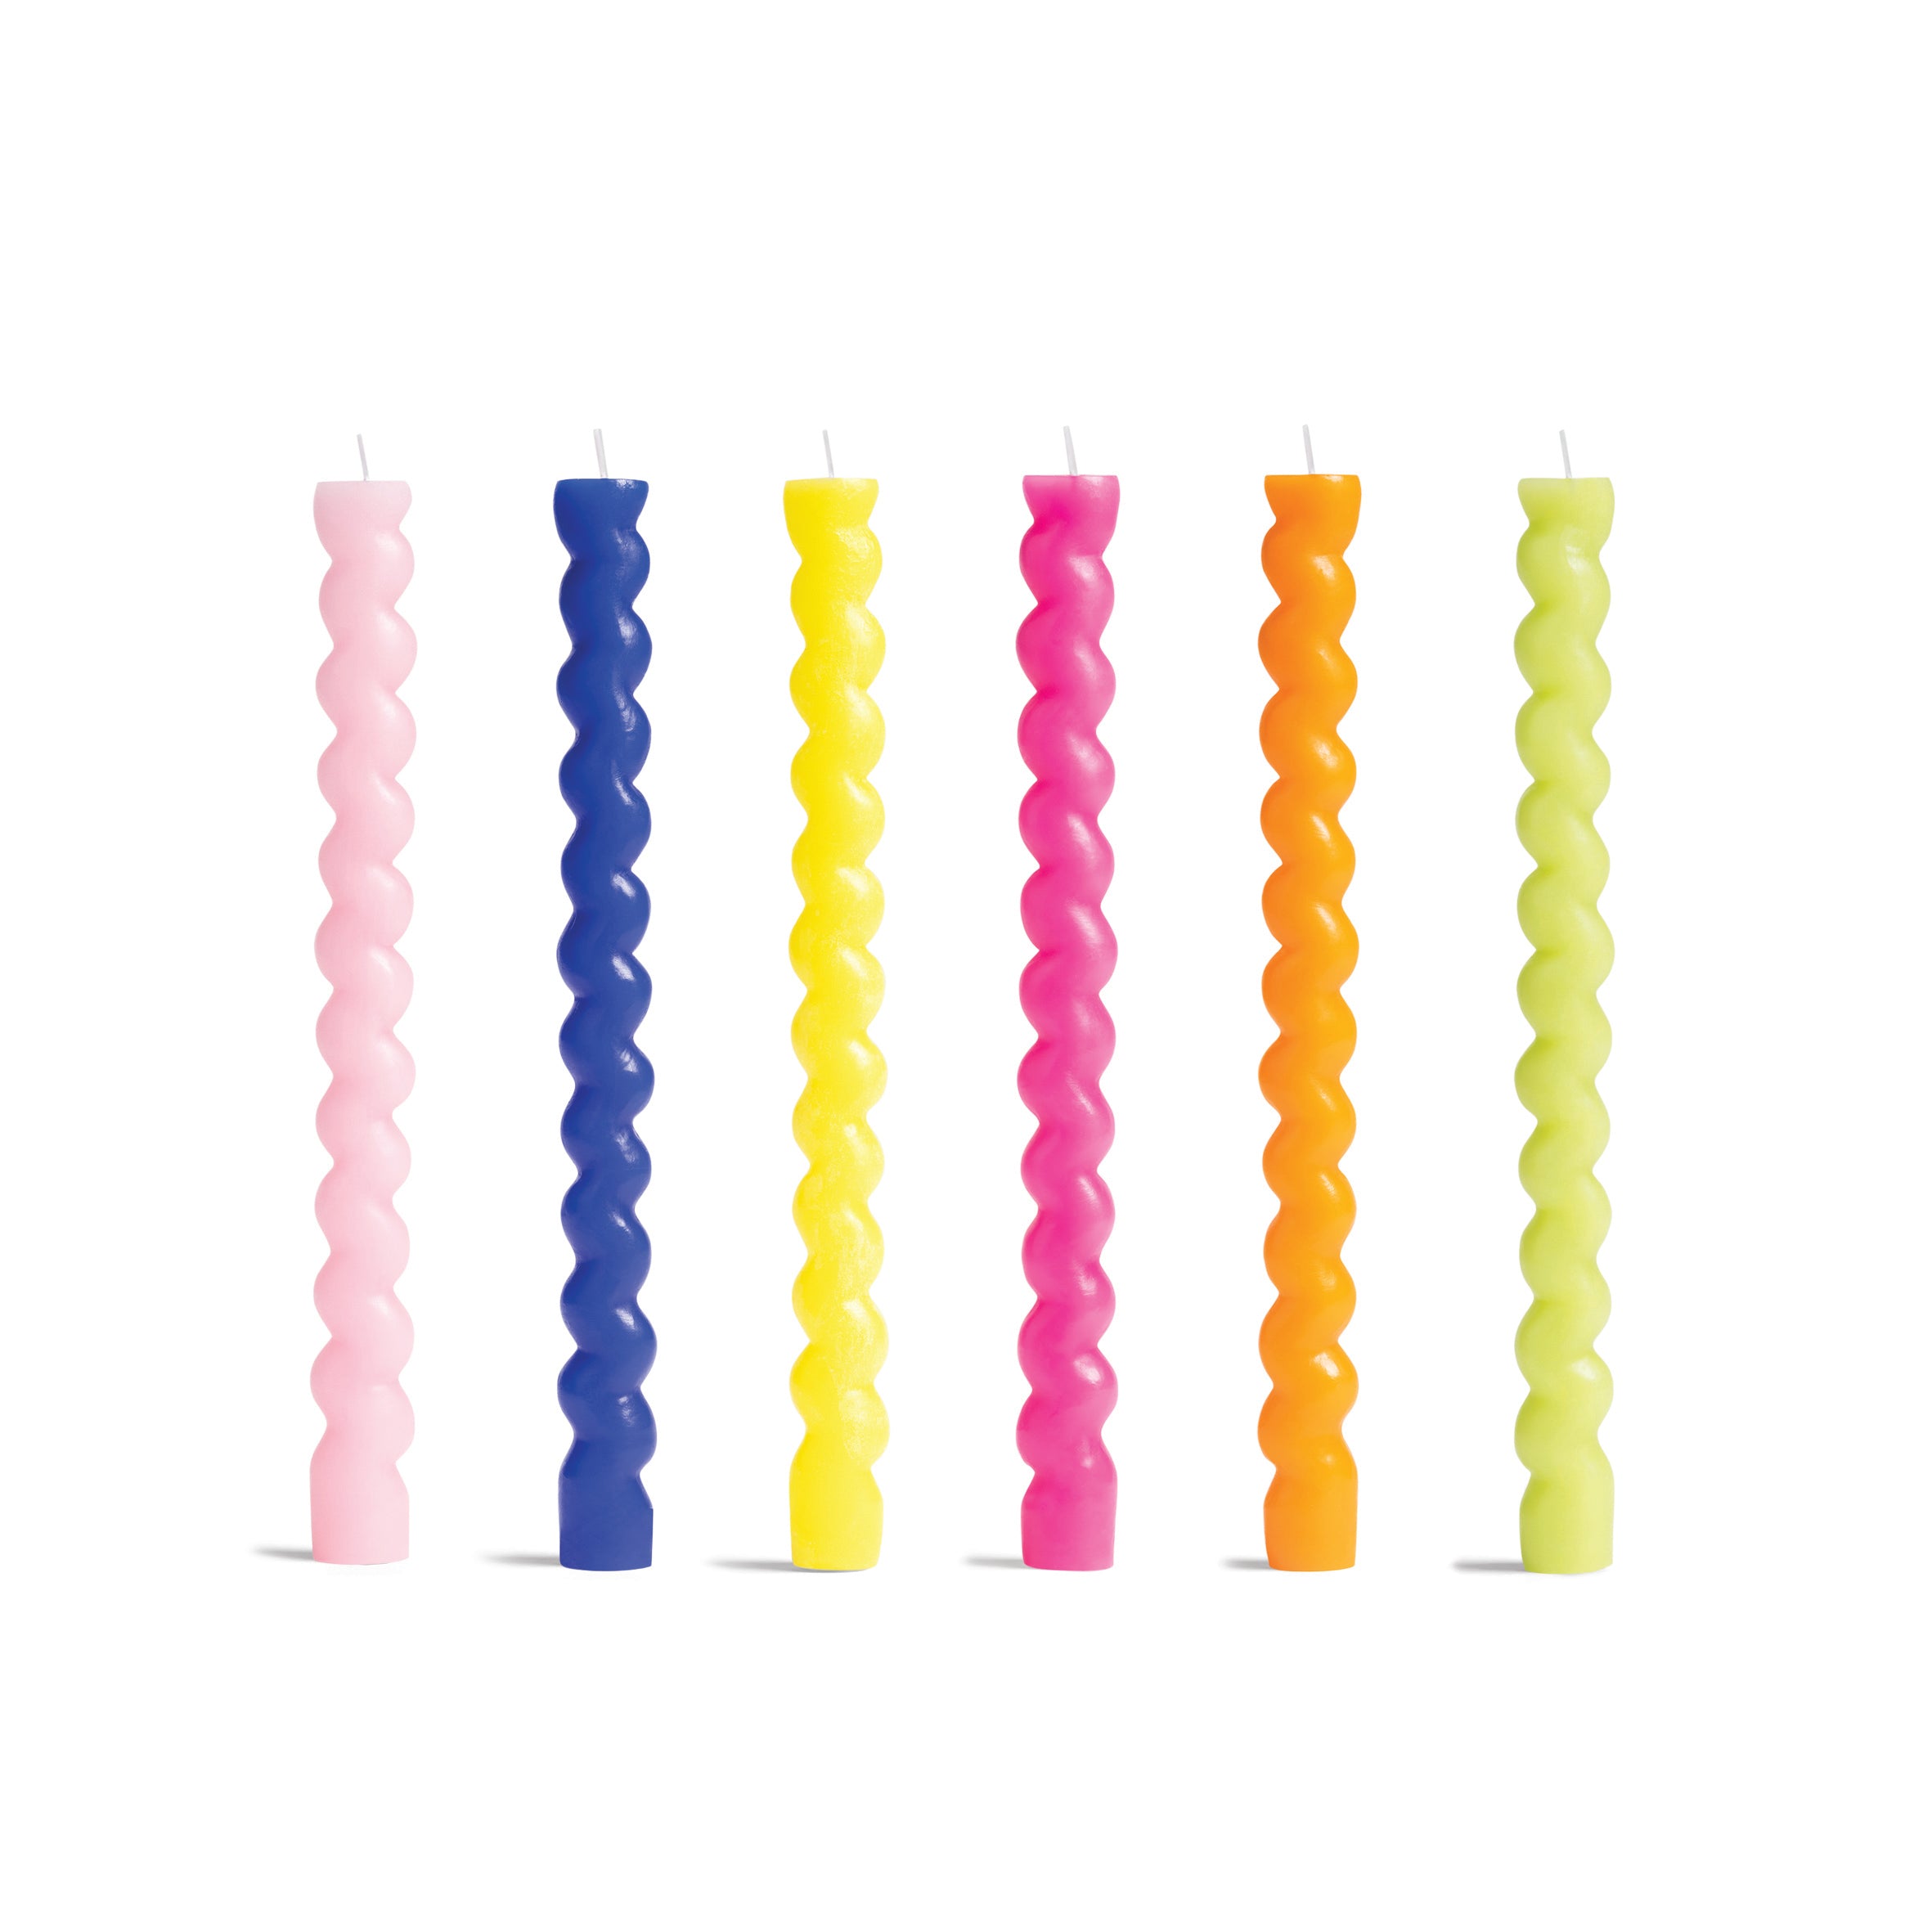 candle-groove-pink-blue-green-yellow-inna-carton-gift-ideas-gifts-Birthday-best-shop-online-Dubai-UAE-for-her-customized-Shops-UAE-supplier-shop-package-packaging-klevering-1